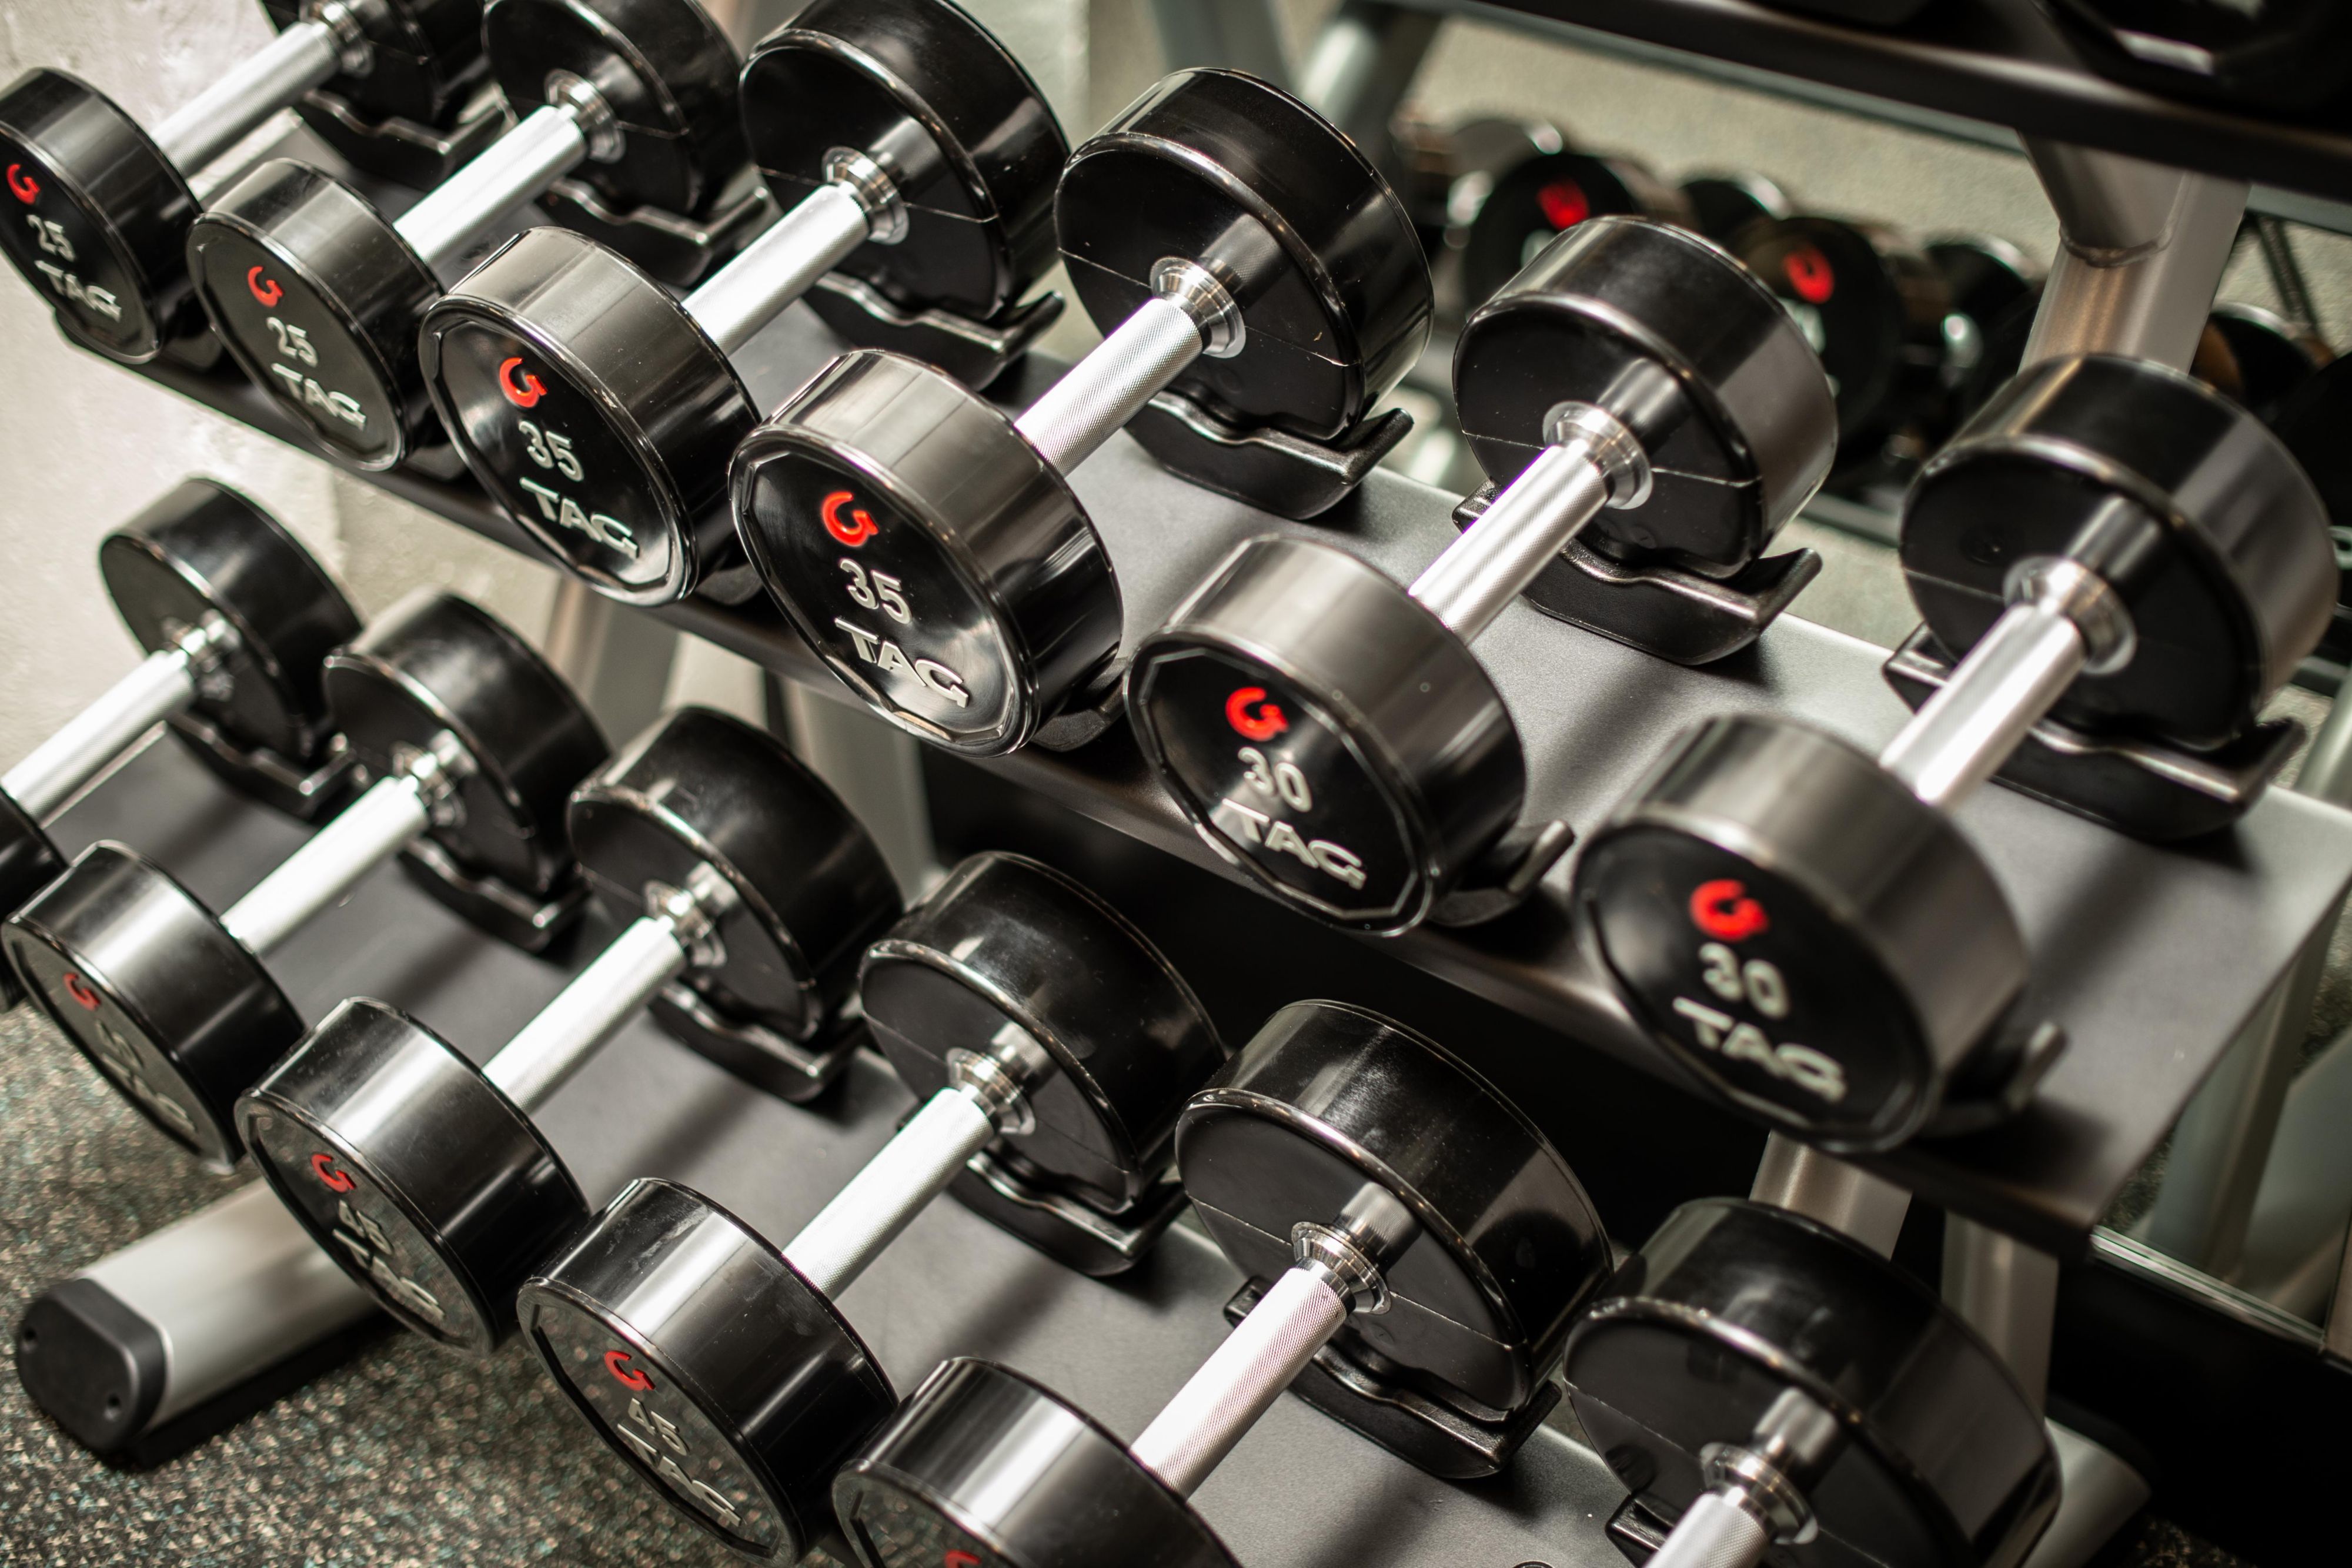 During your stay, enjoy our large Fitness Center located in our lower level. Open 24-hours, we have towels, complimentary earbuds for our cardio equipment should you need it, and a water bottle fill station all available to you.